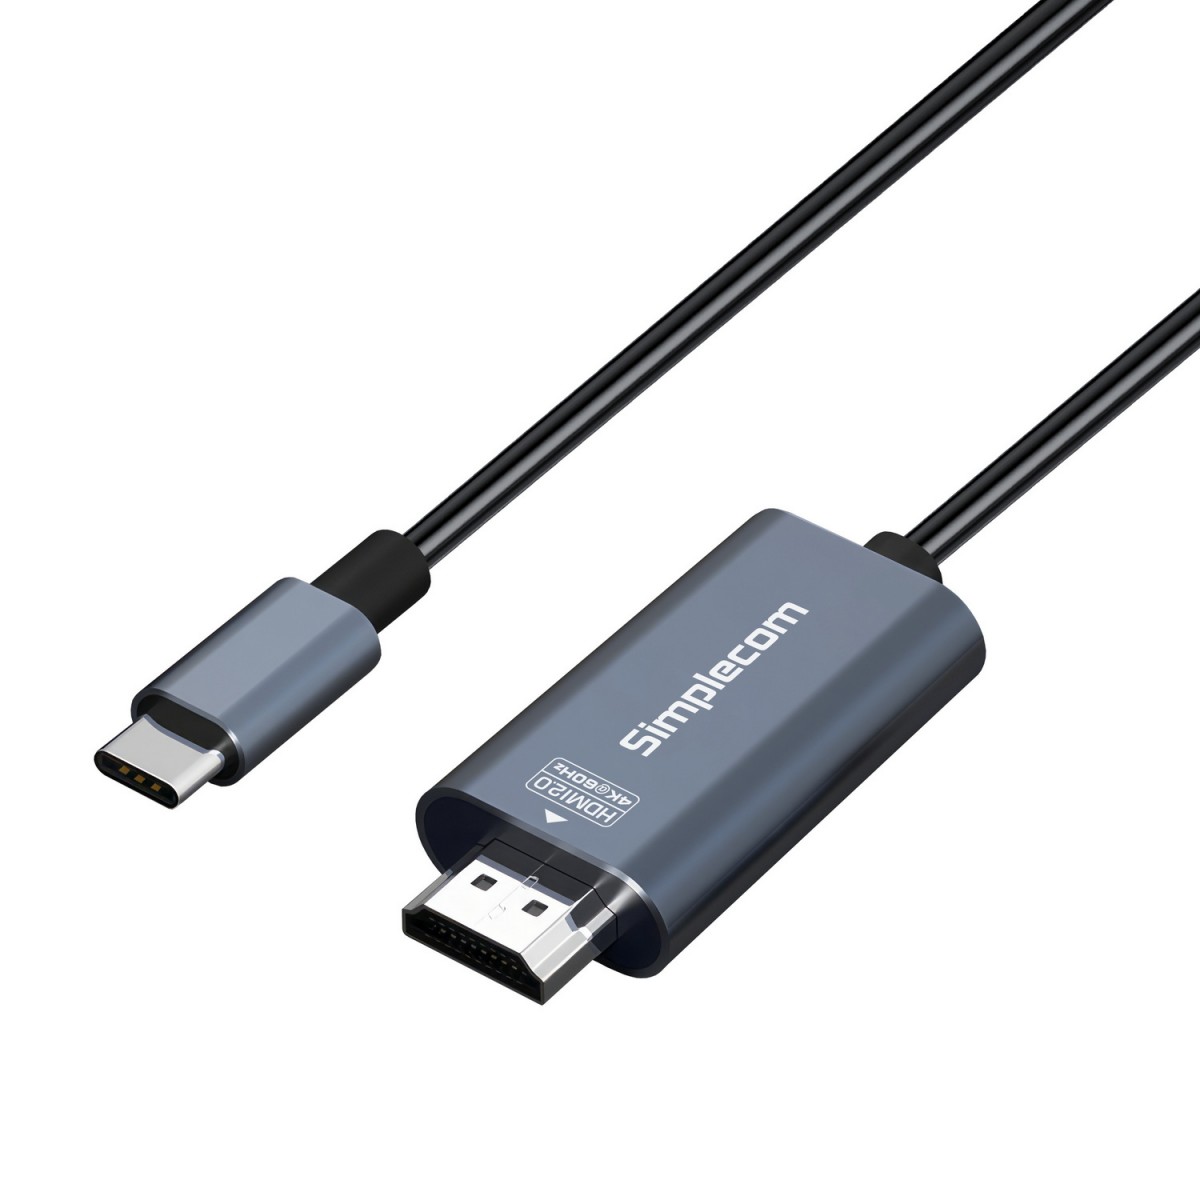  USB Type-C to HDMI 2.0 Cable 2M HDCP 4K@60Hz  